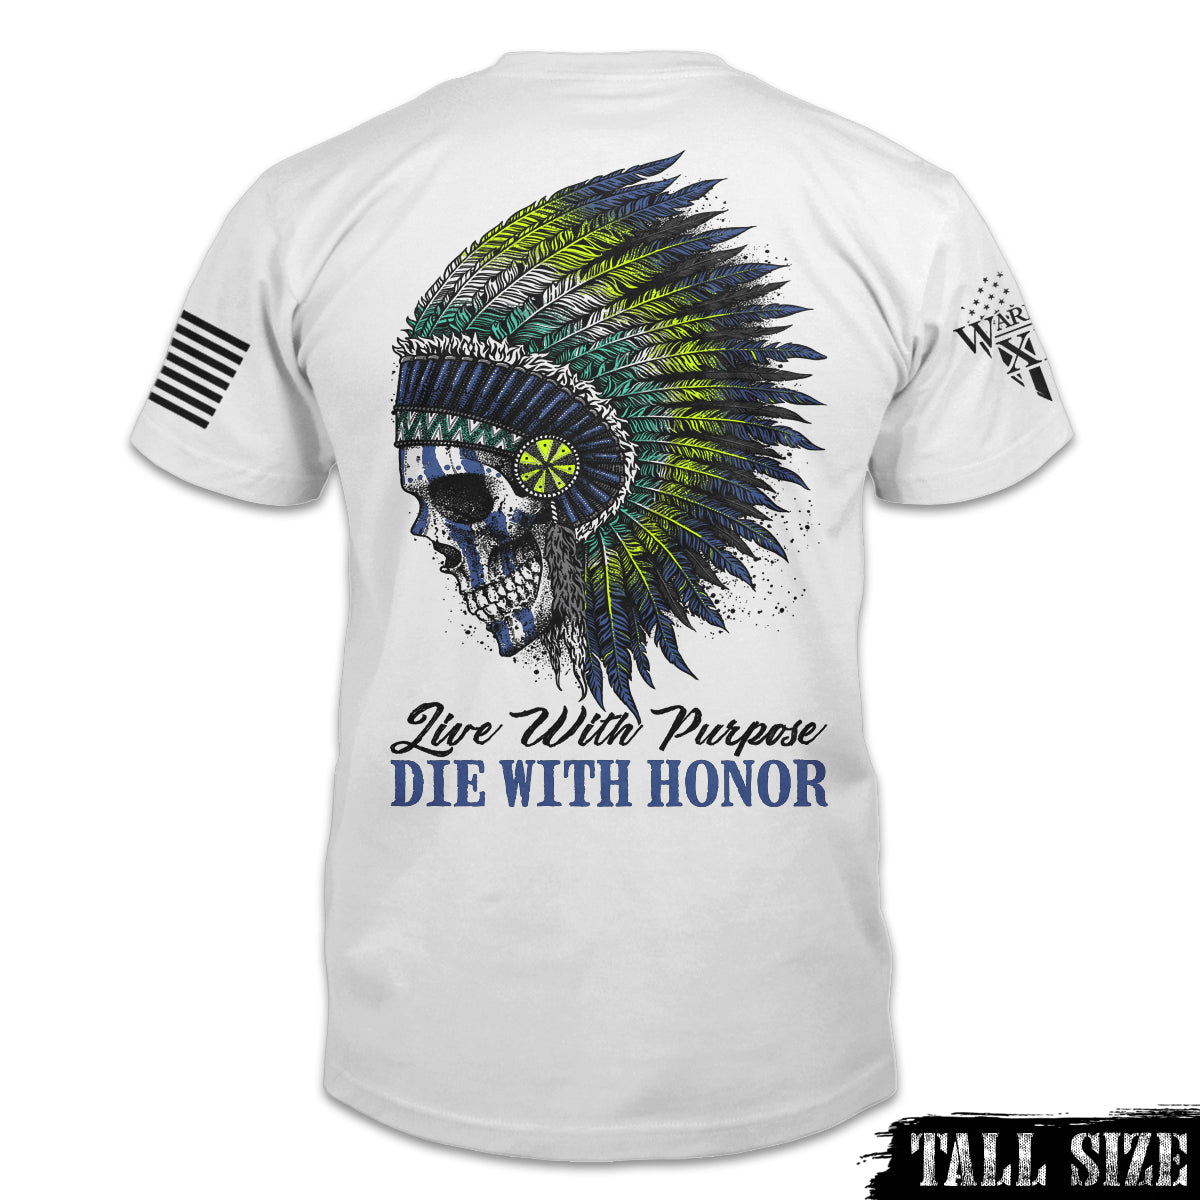 A white tall sized shirt with the words "Live With Purpose, Die With Honor" and a native American with a colorful crown printed on the back.